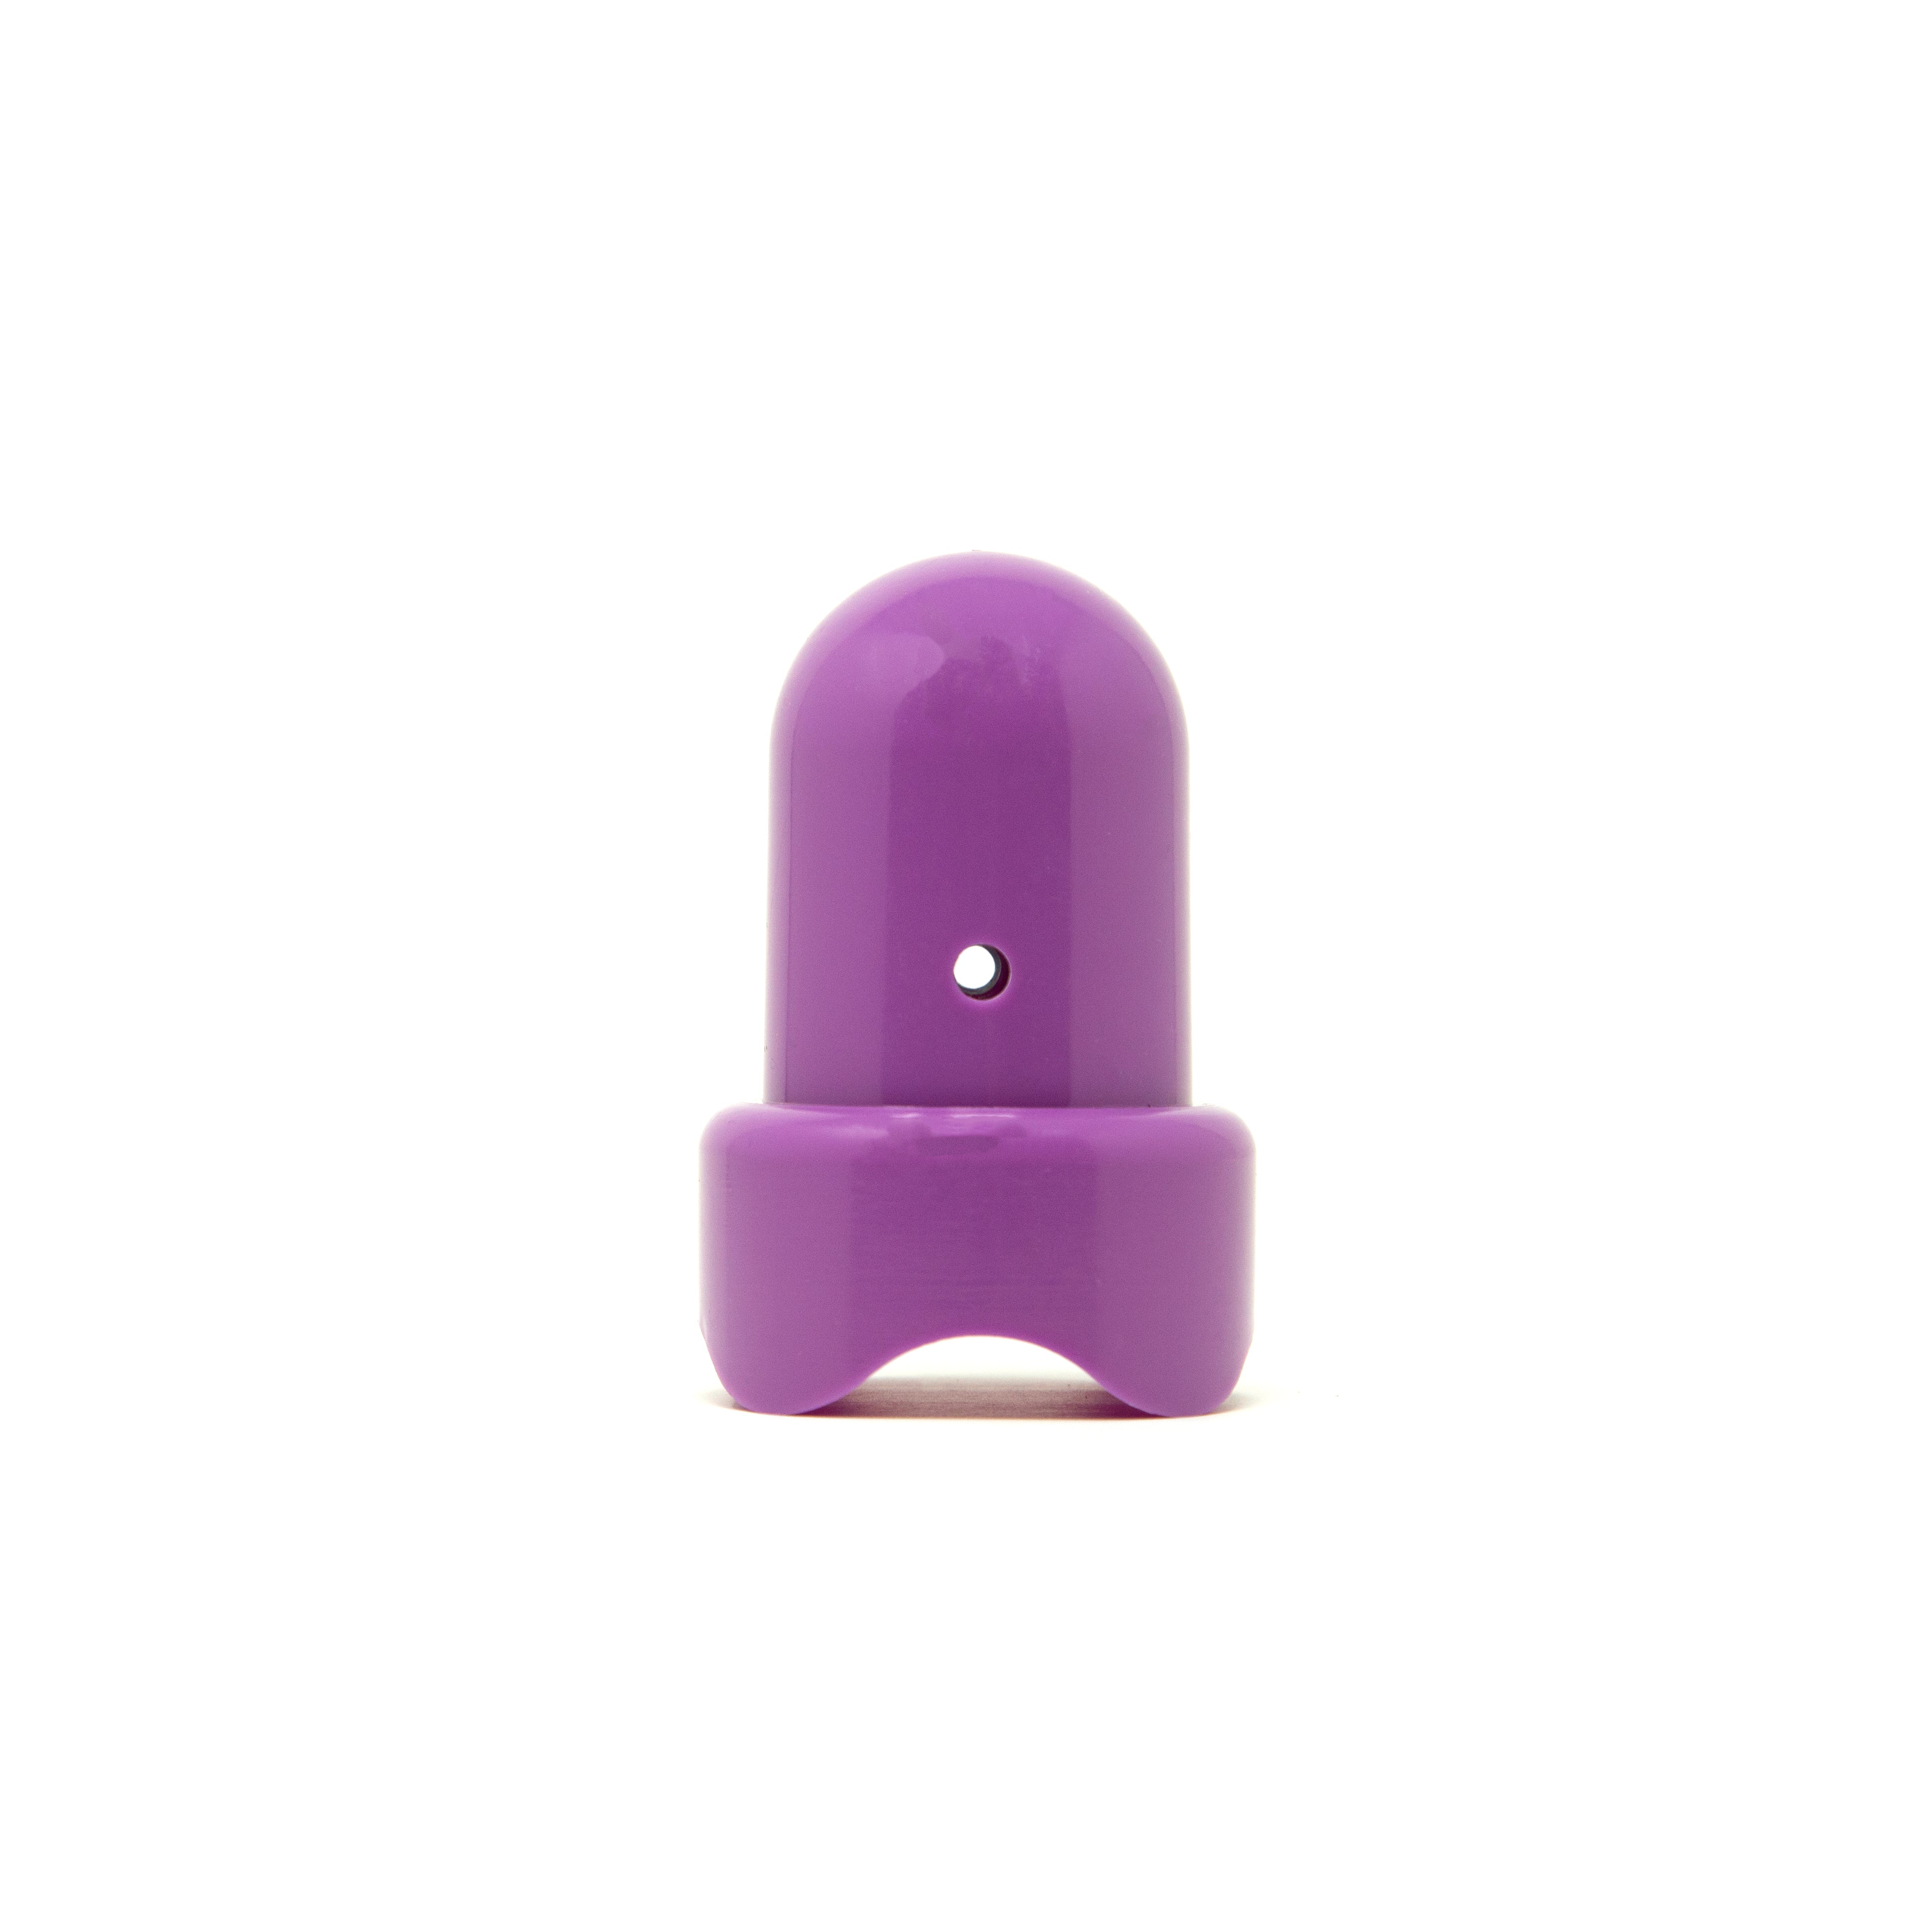 Purple pole cap with round hole facing forward. 